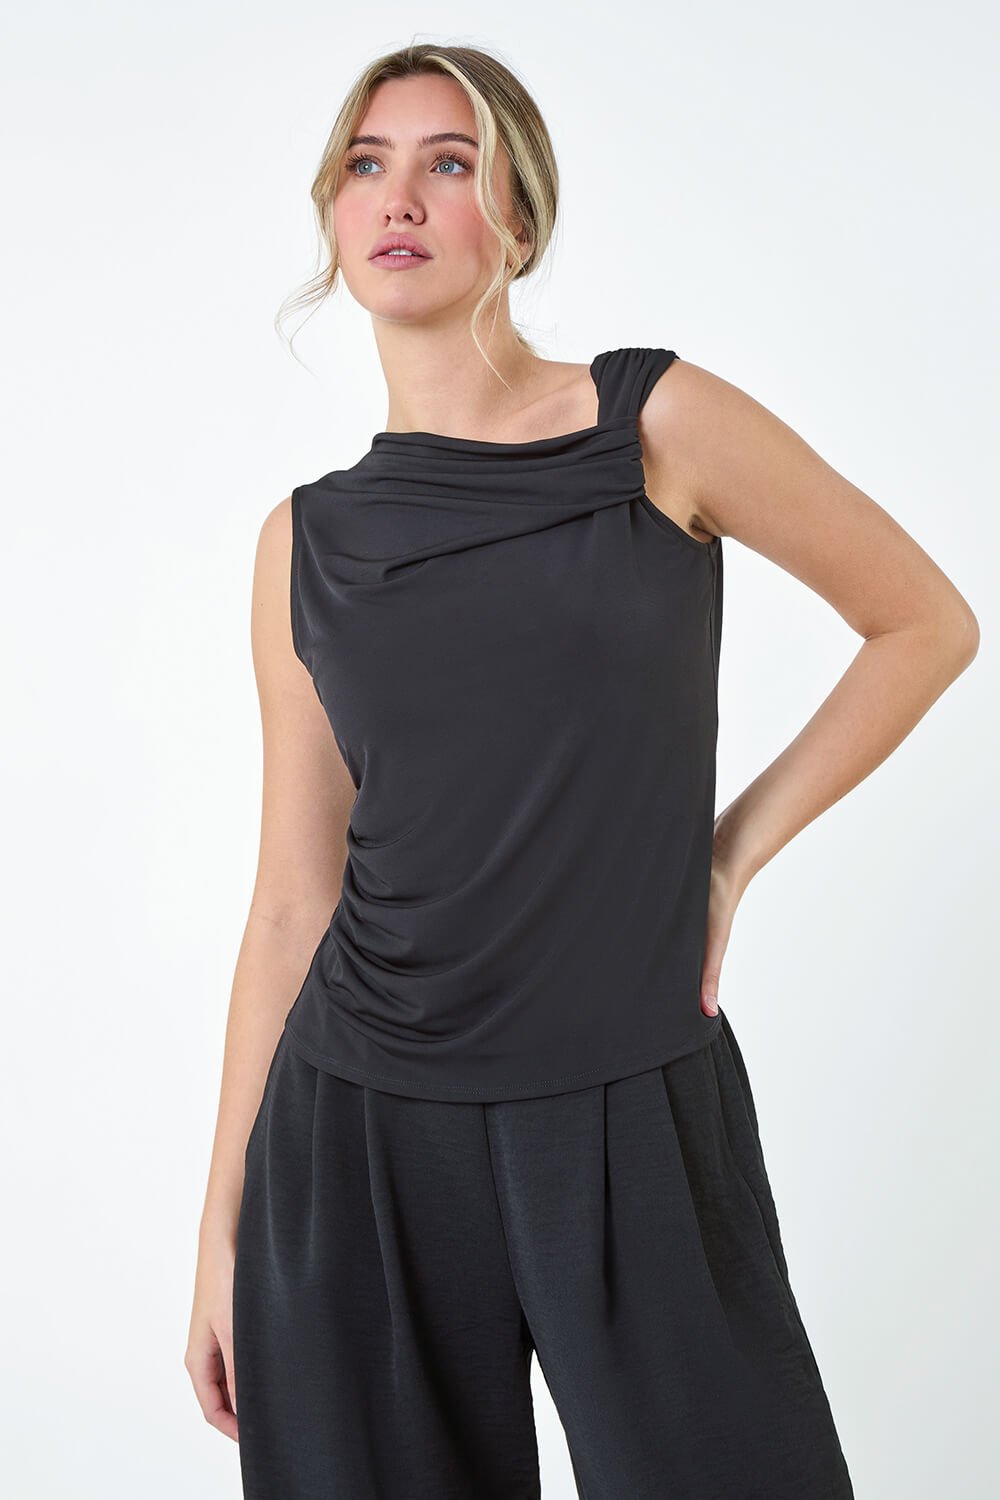 Black Ruched Twist Cowl Neck Stretch Top, Image 4 of 5